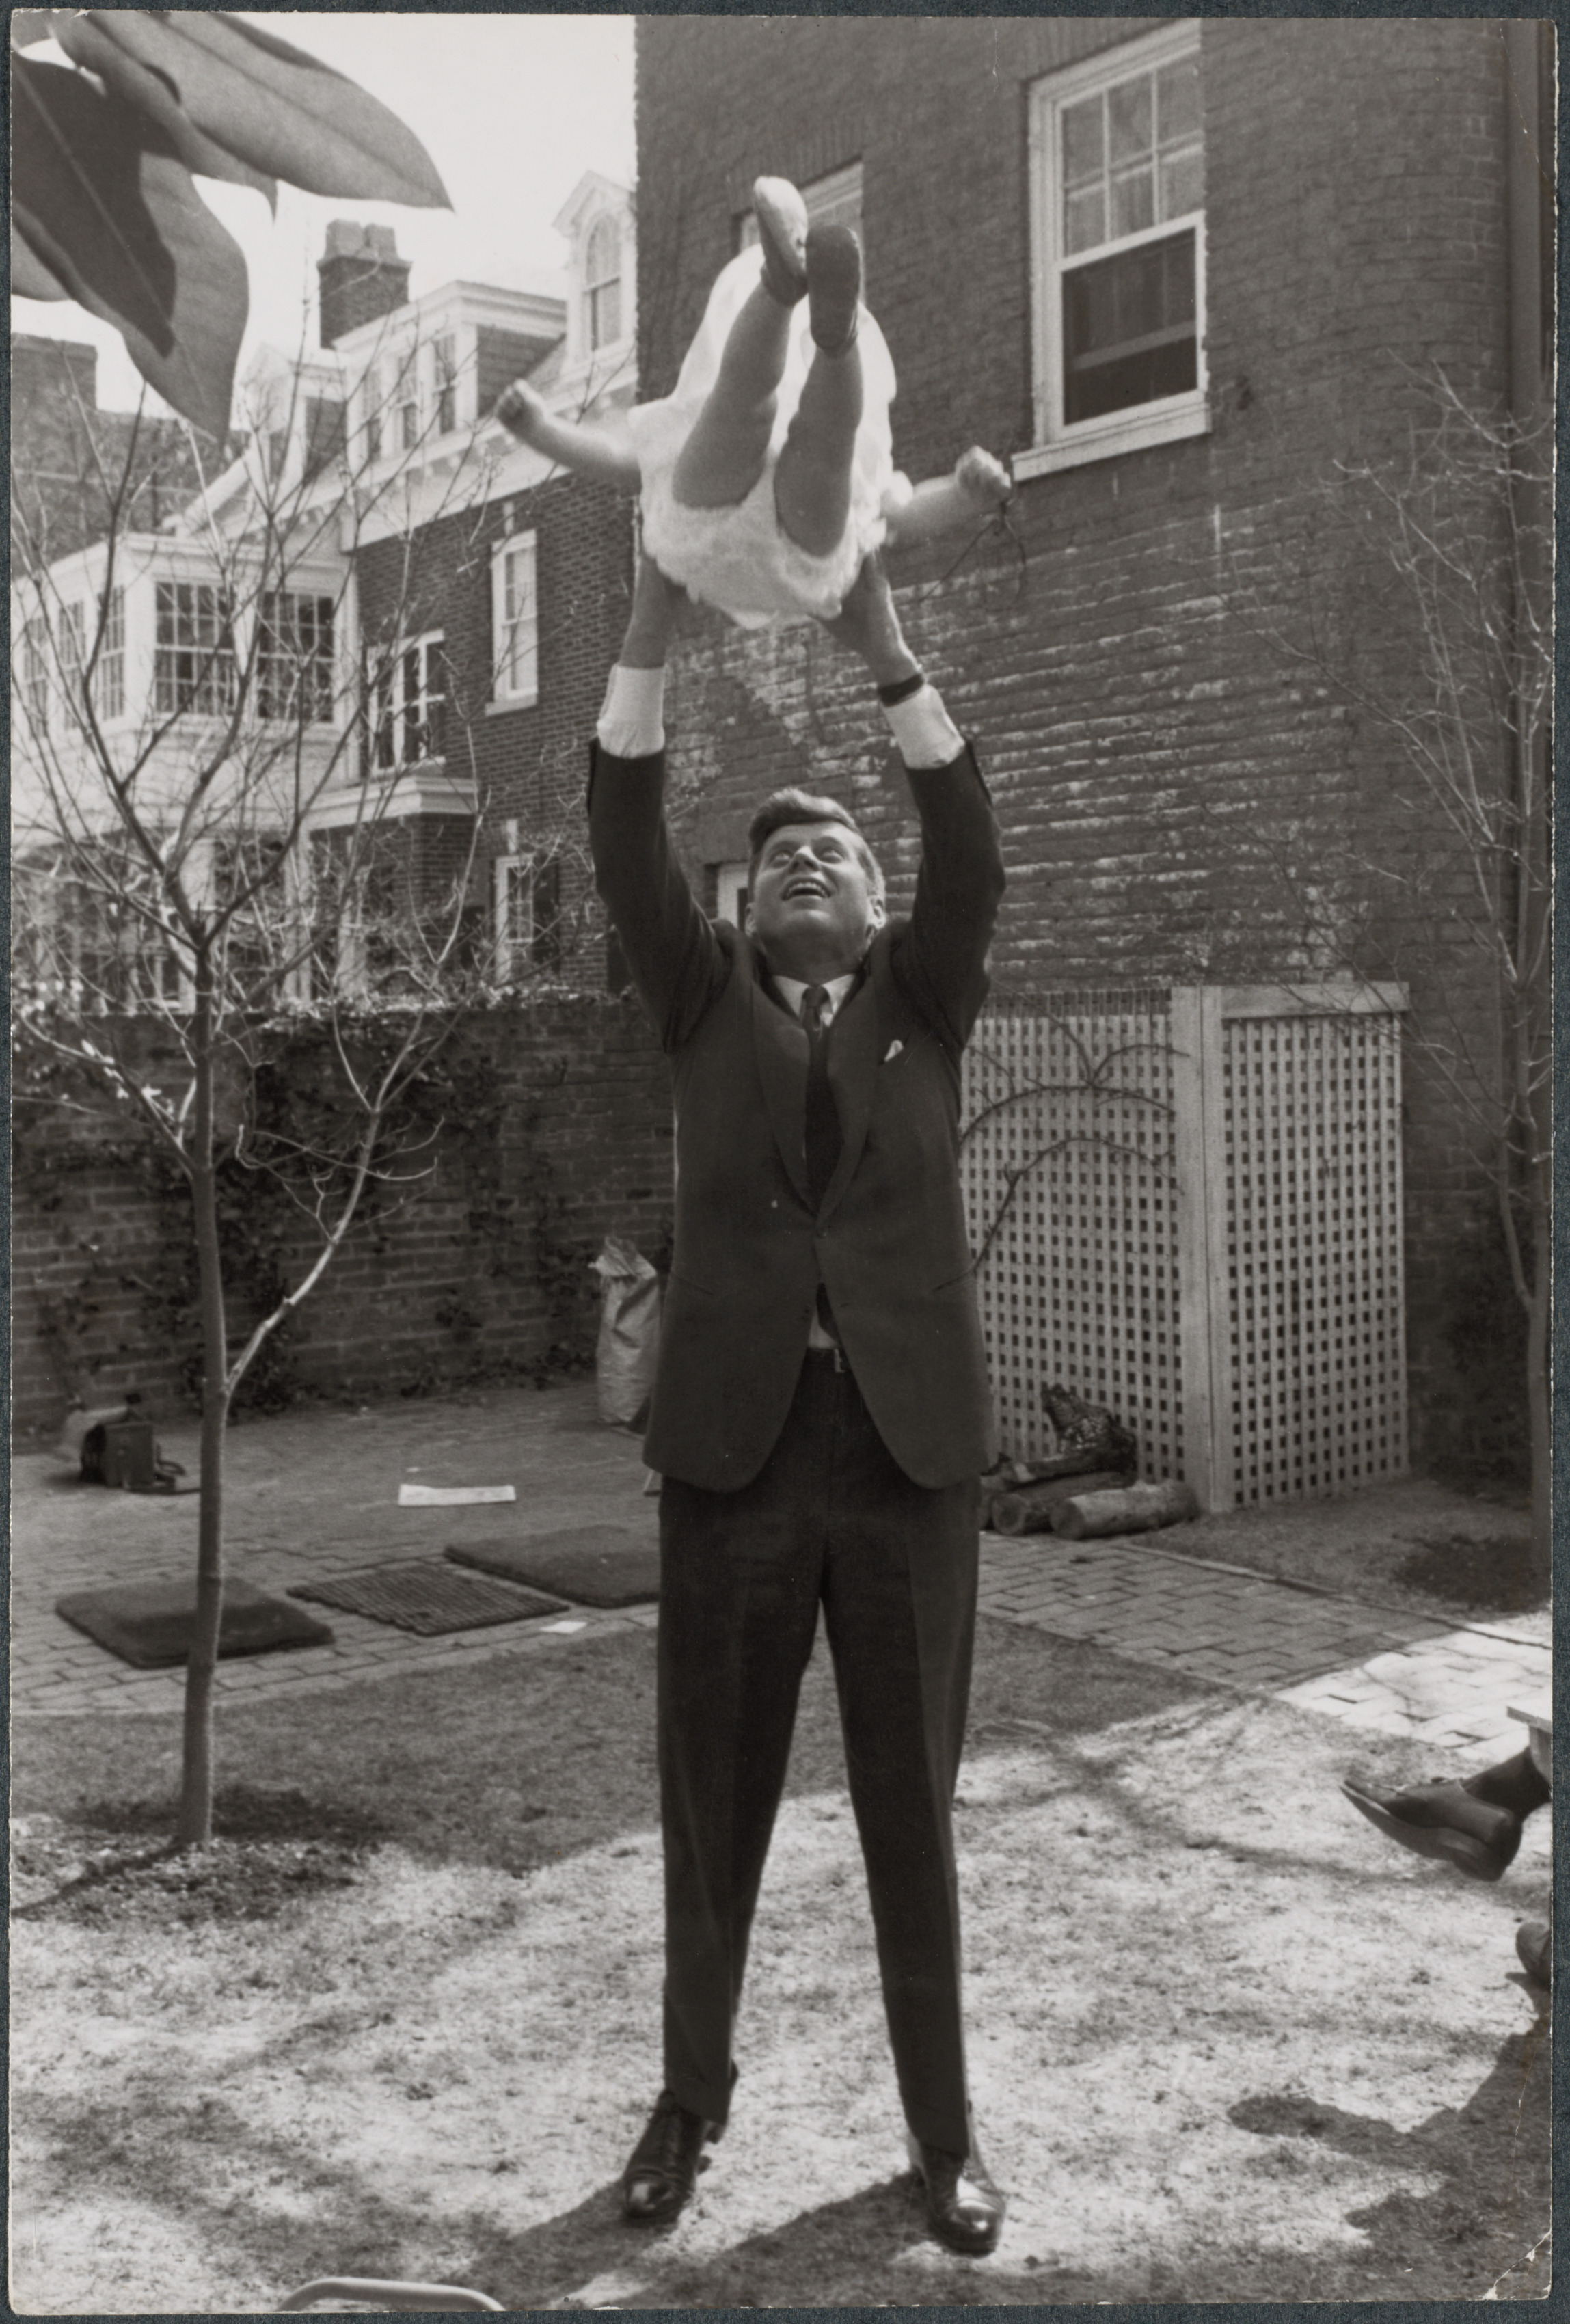 John F. Kennedy tossing daughter Caroline in the air